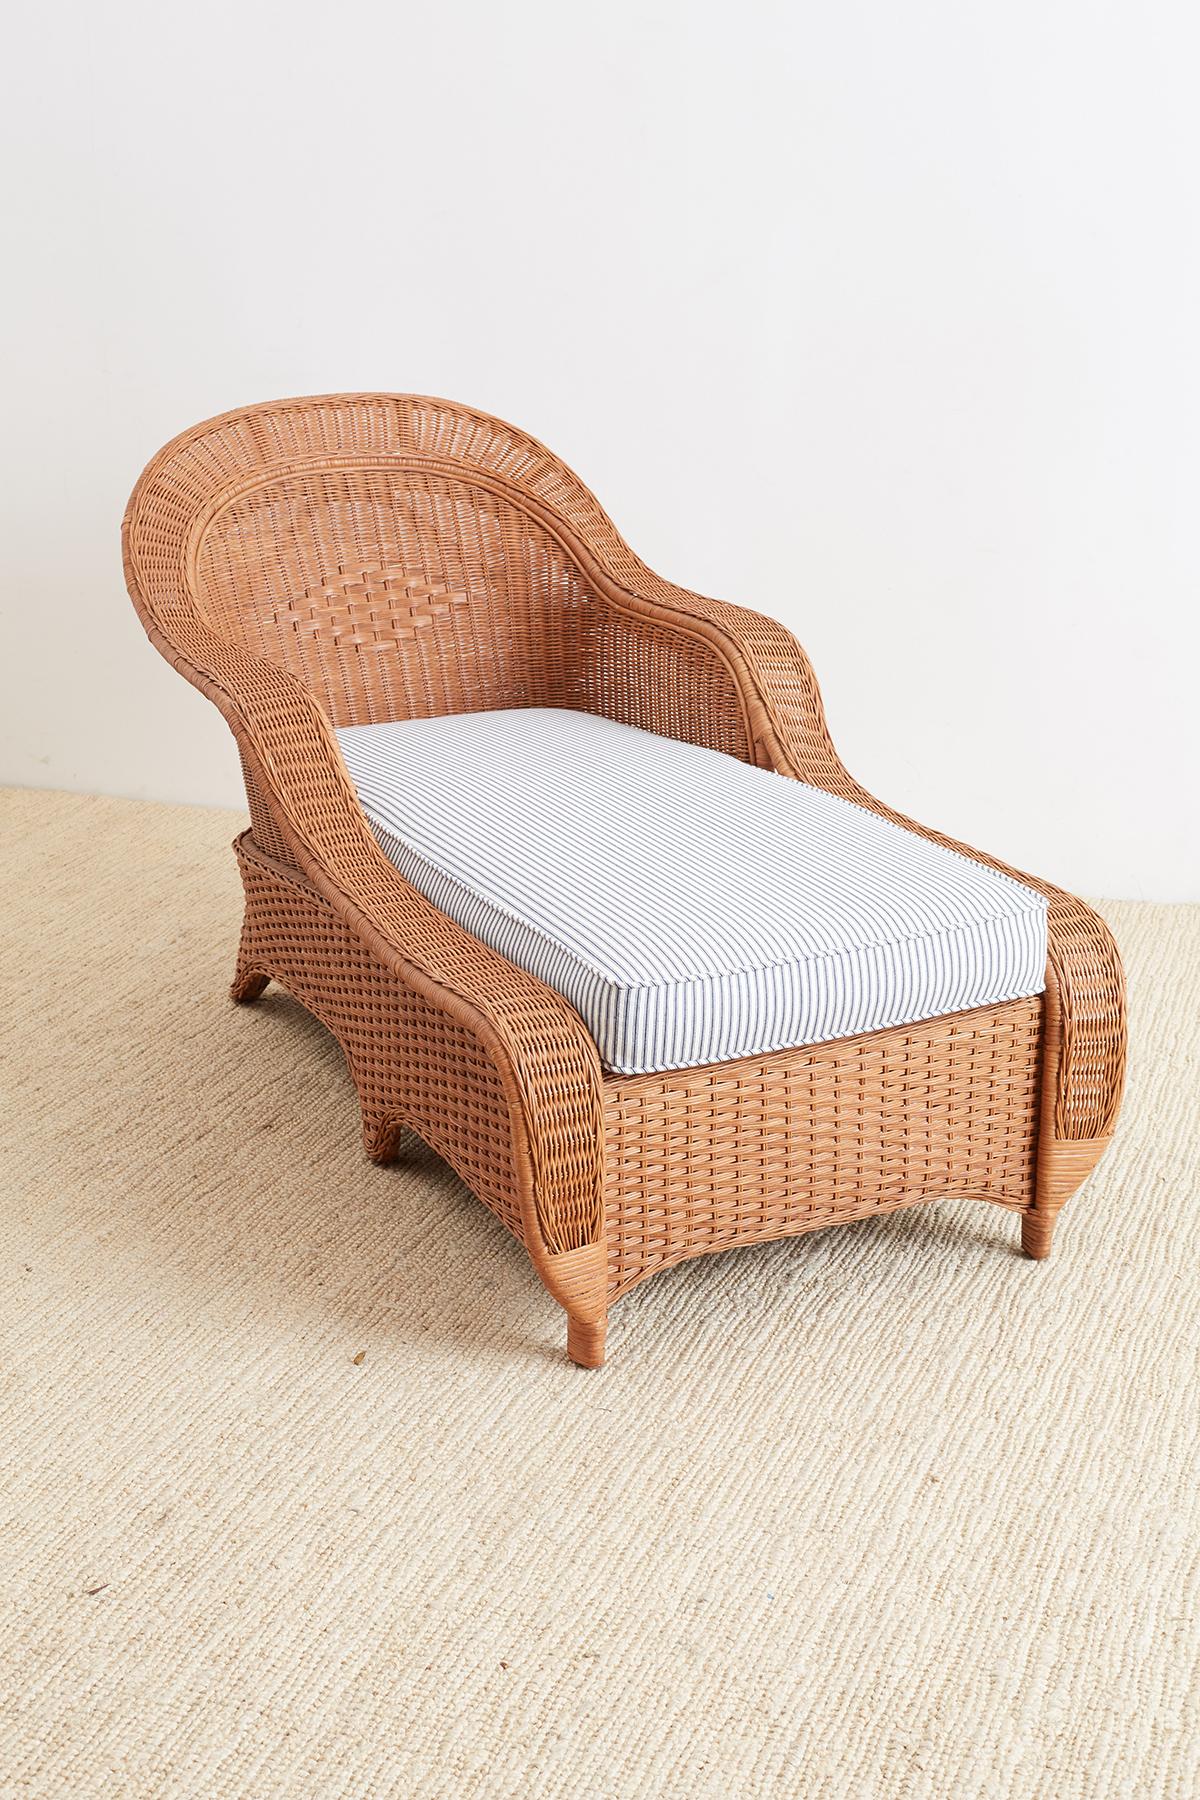 French Style Wicker Chaise Longue with Waverly Ticking Stripe Upholstery 4